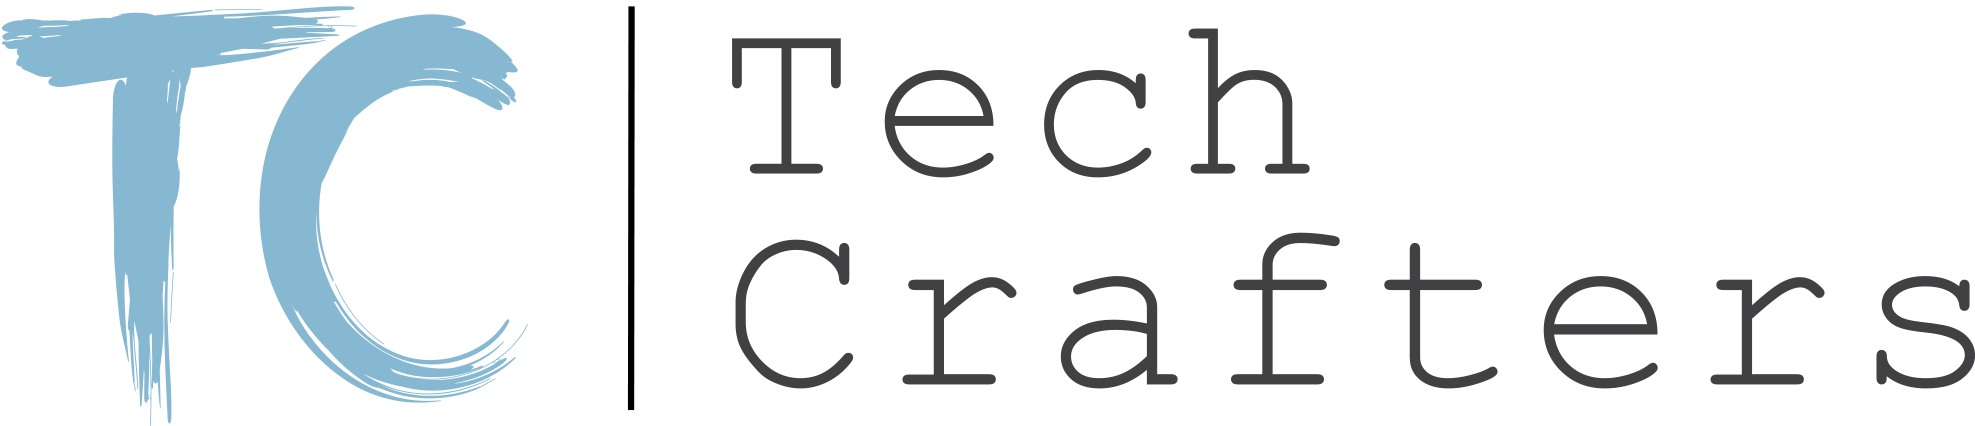 Websites, Digital Advertising, Consulting | Tech Crafters